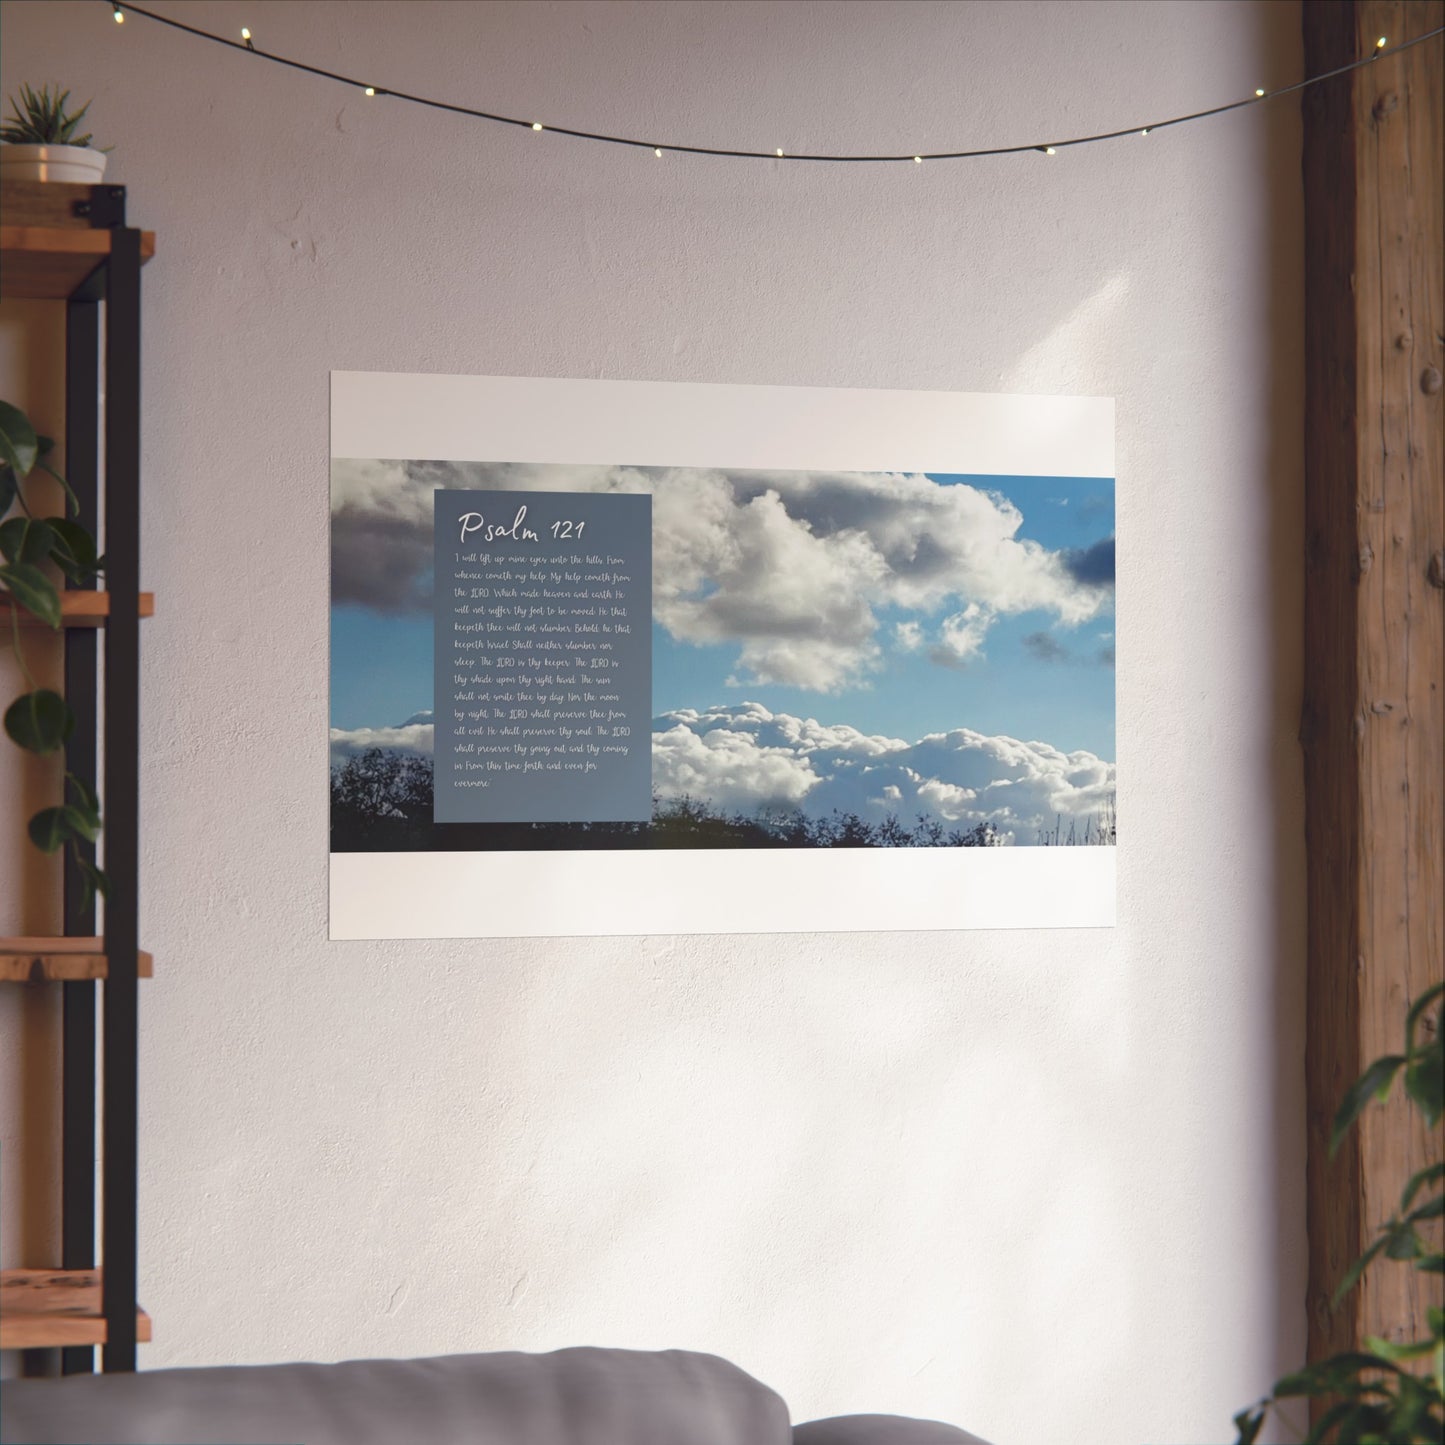 “I WILL LIFT UP MINE EYES TO THE HILLS”, Psalm 121 Poster